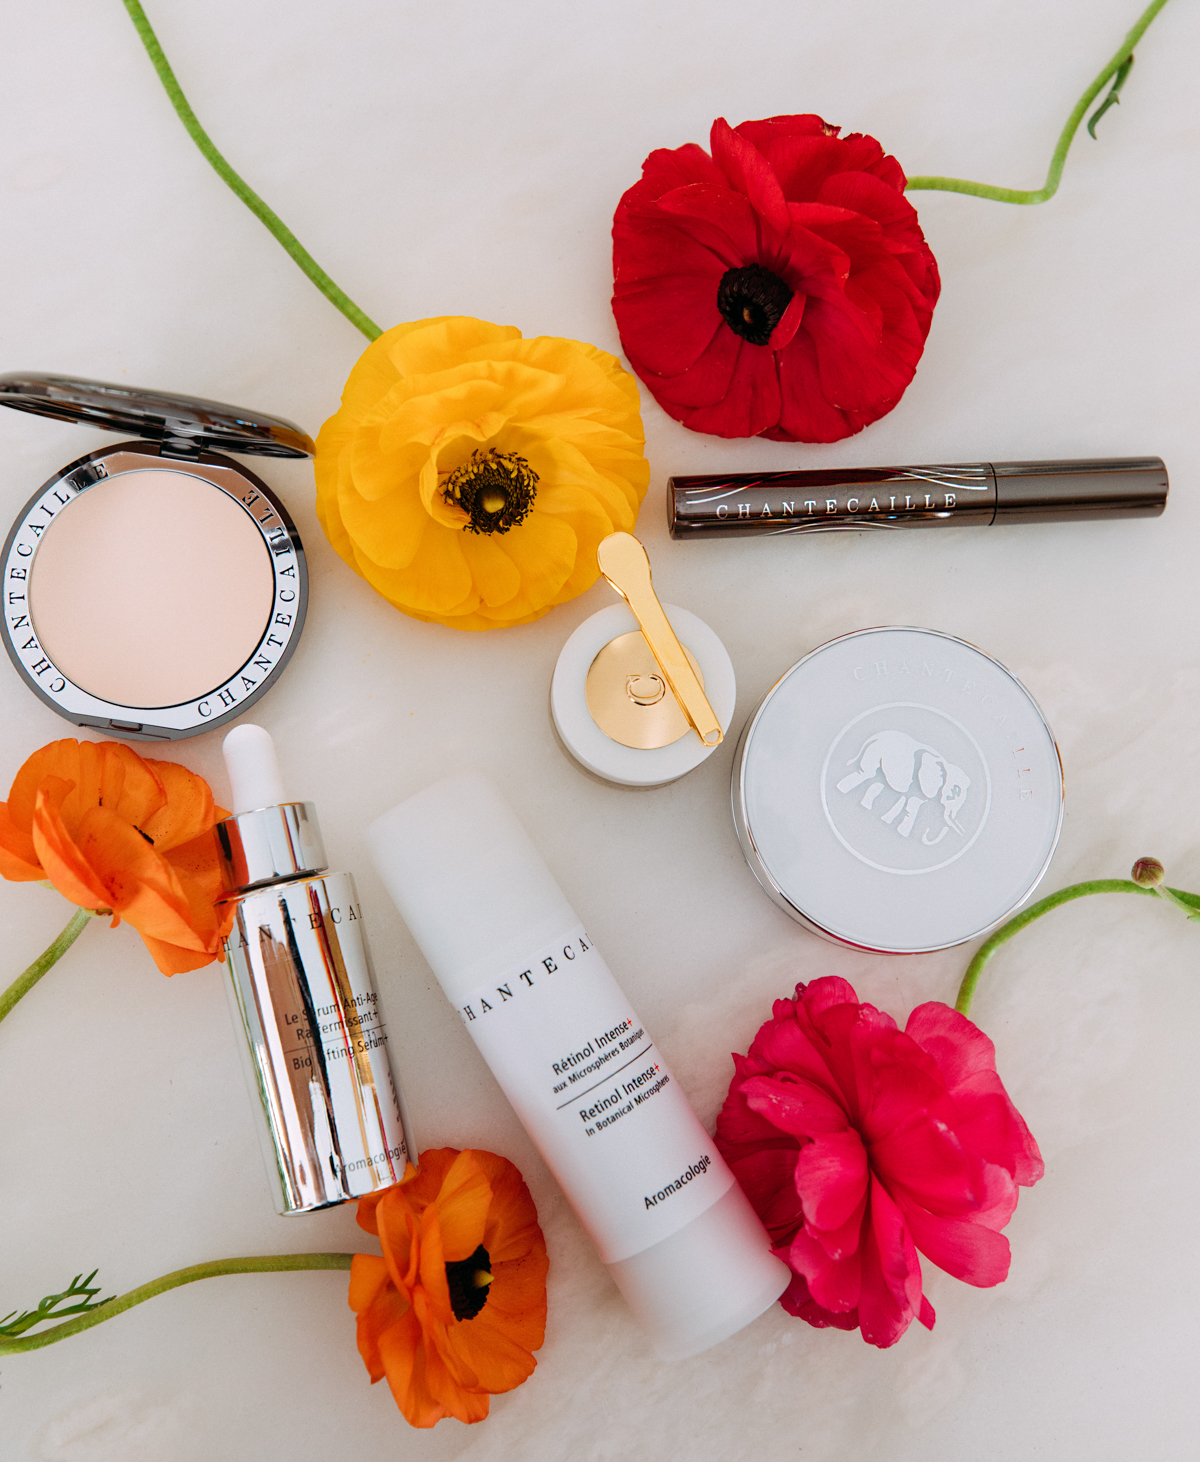 Spring Skincare With Chantecaille